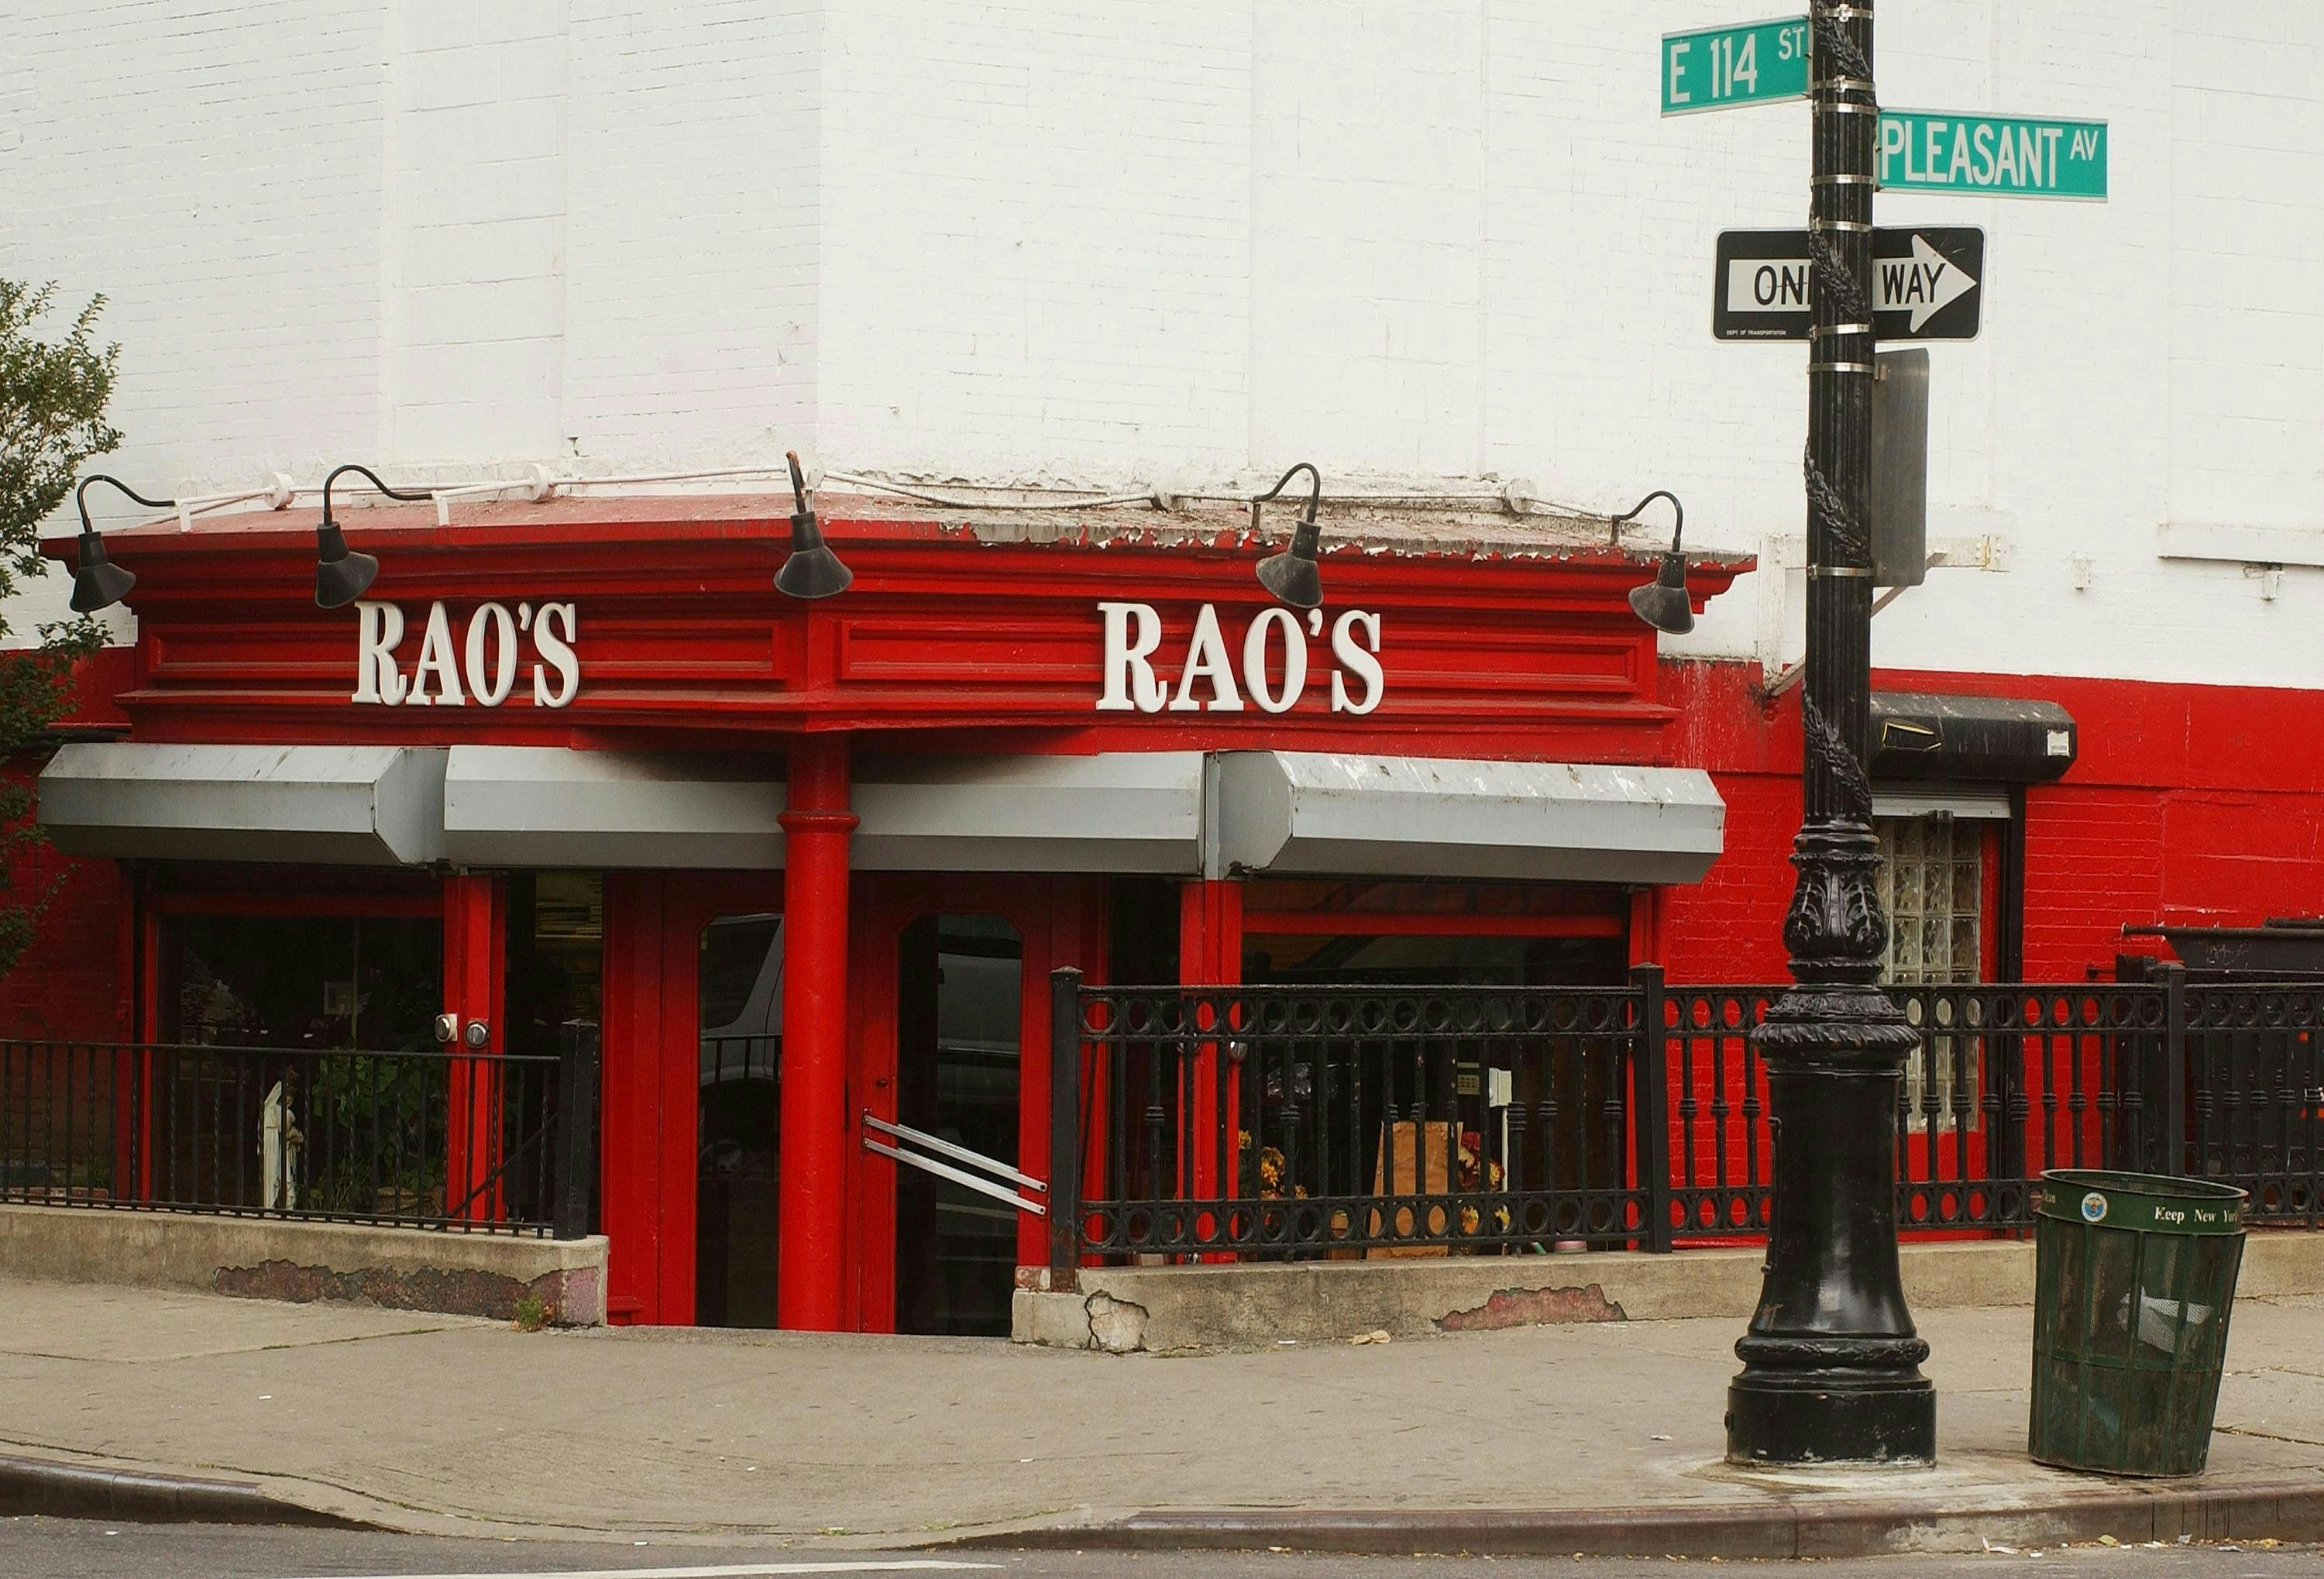 411760 wide angle lense sopranos red front rao's restaraunt manhattan hbo food fish eye exterior entertainment celebrity actor new york ny